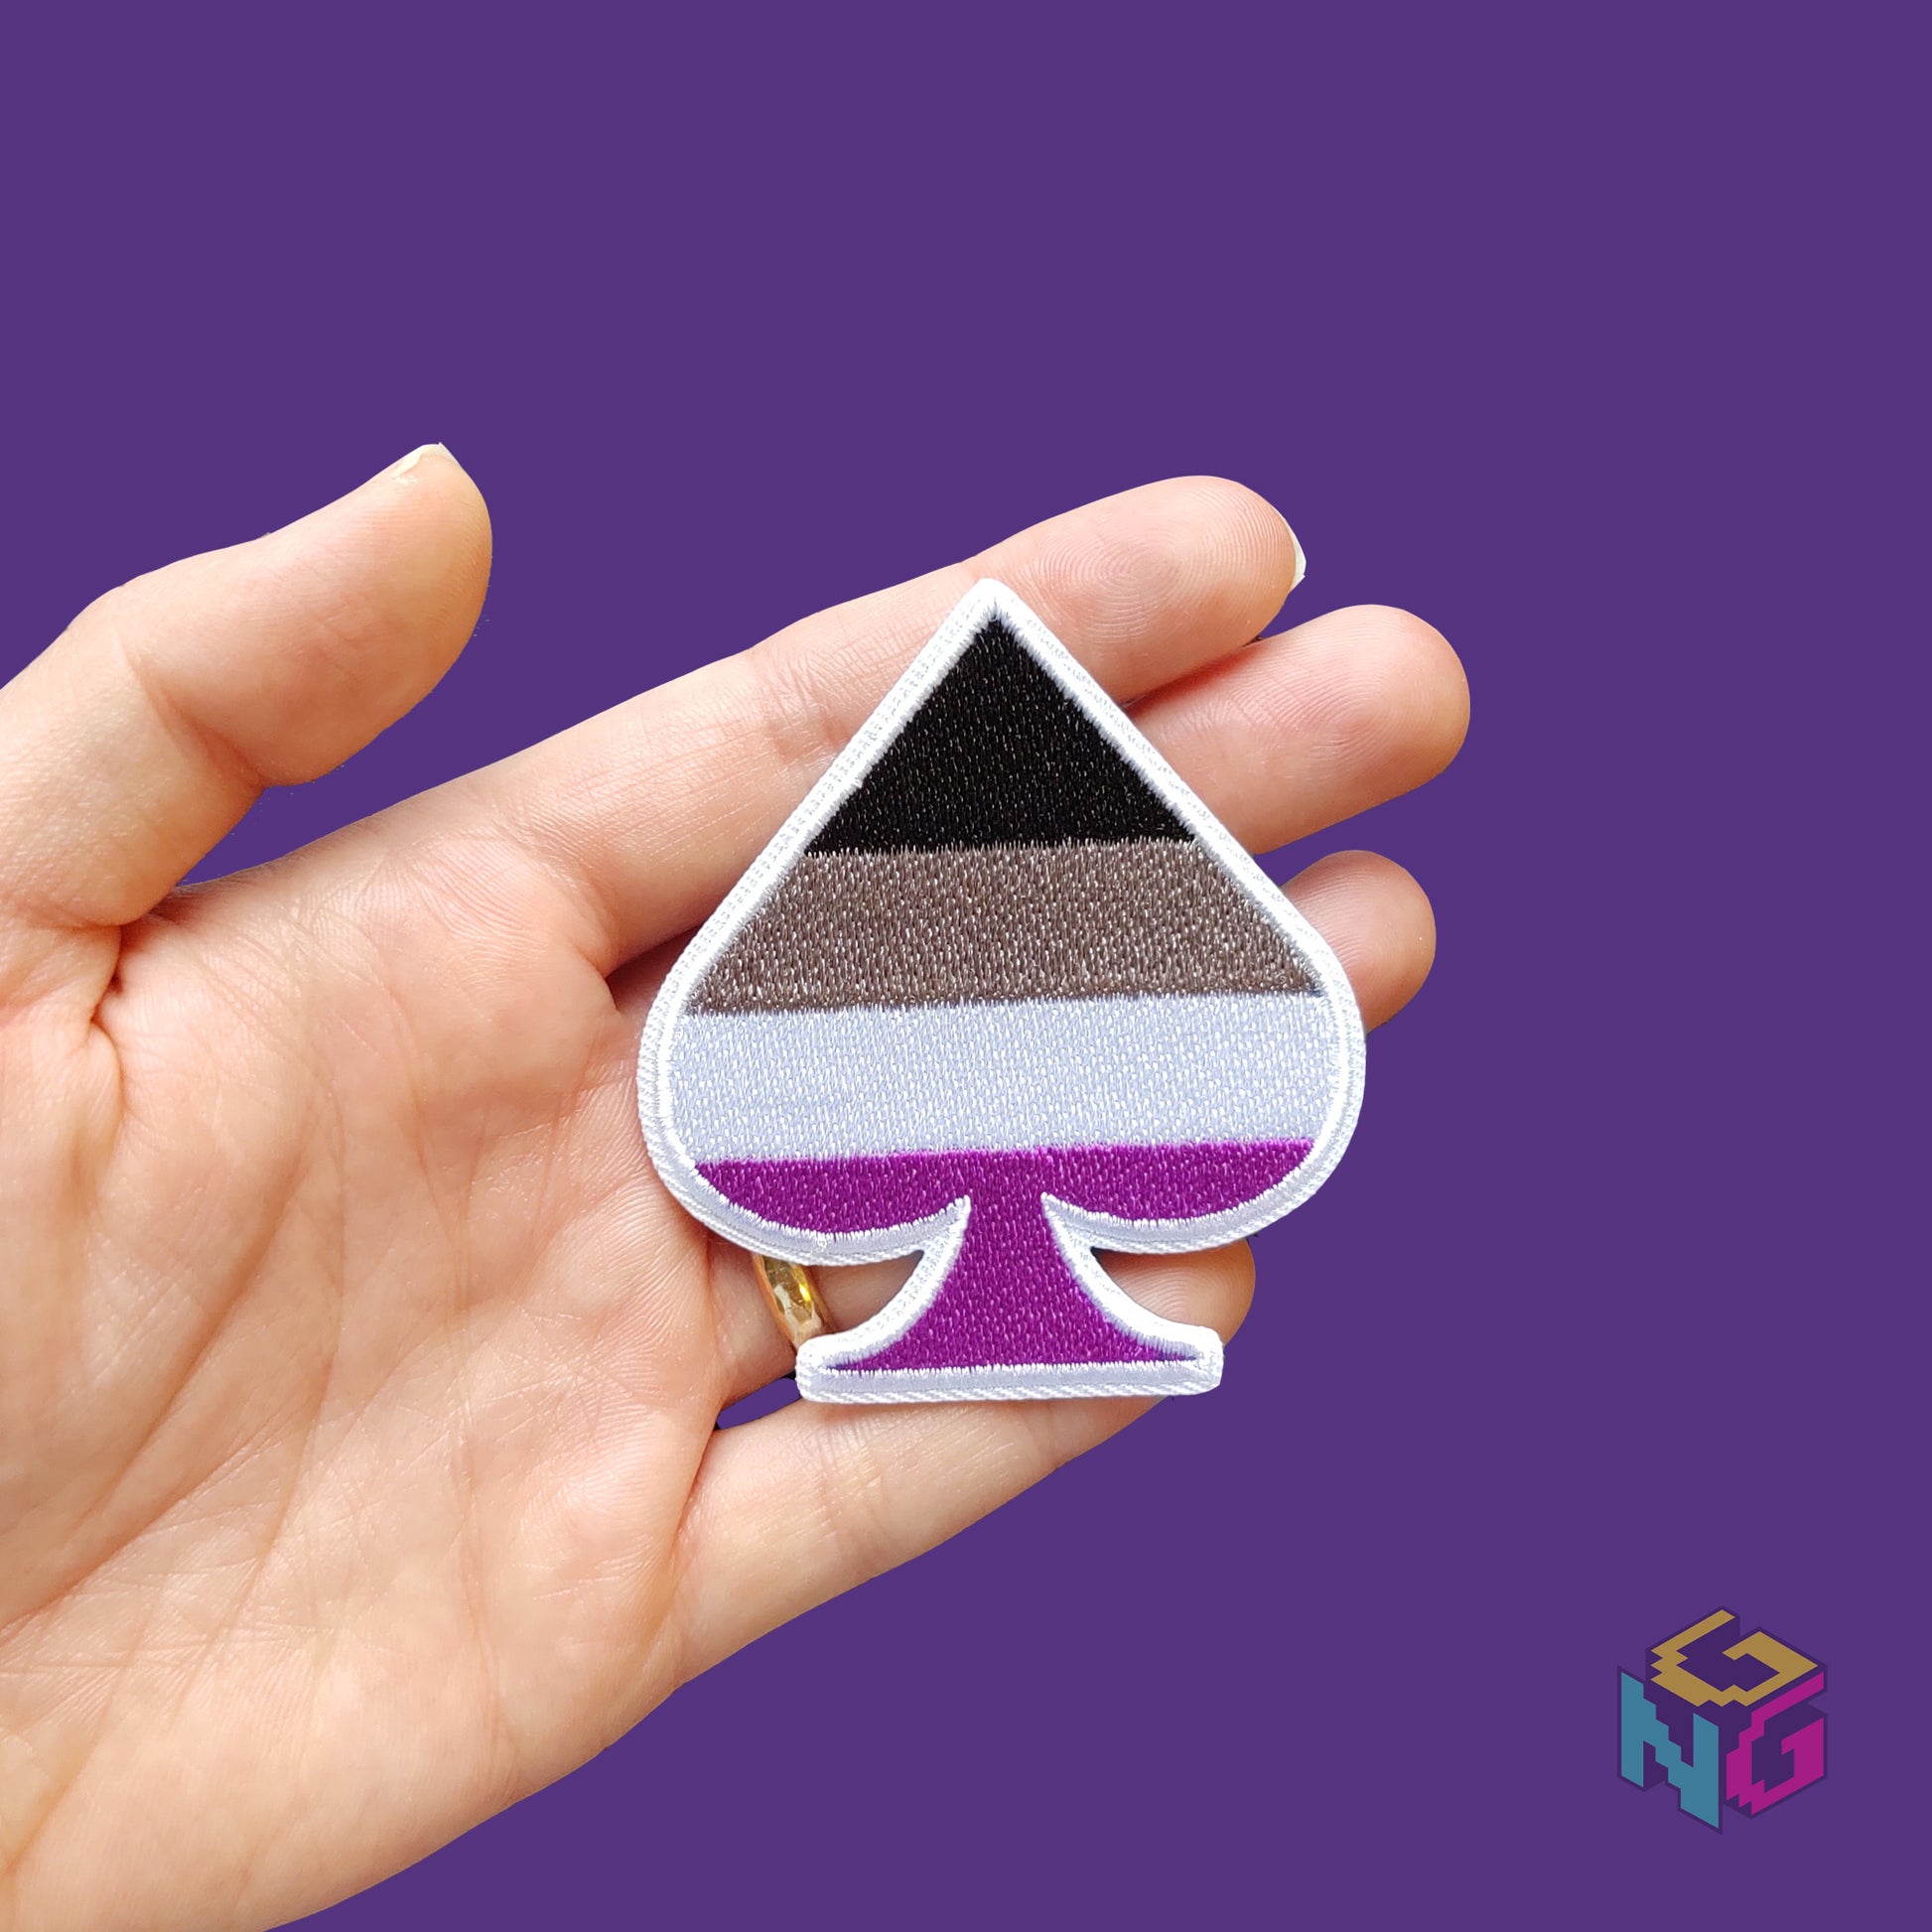 asexual embroidered patch held in a hand for scale in front of a purple background